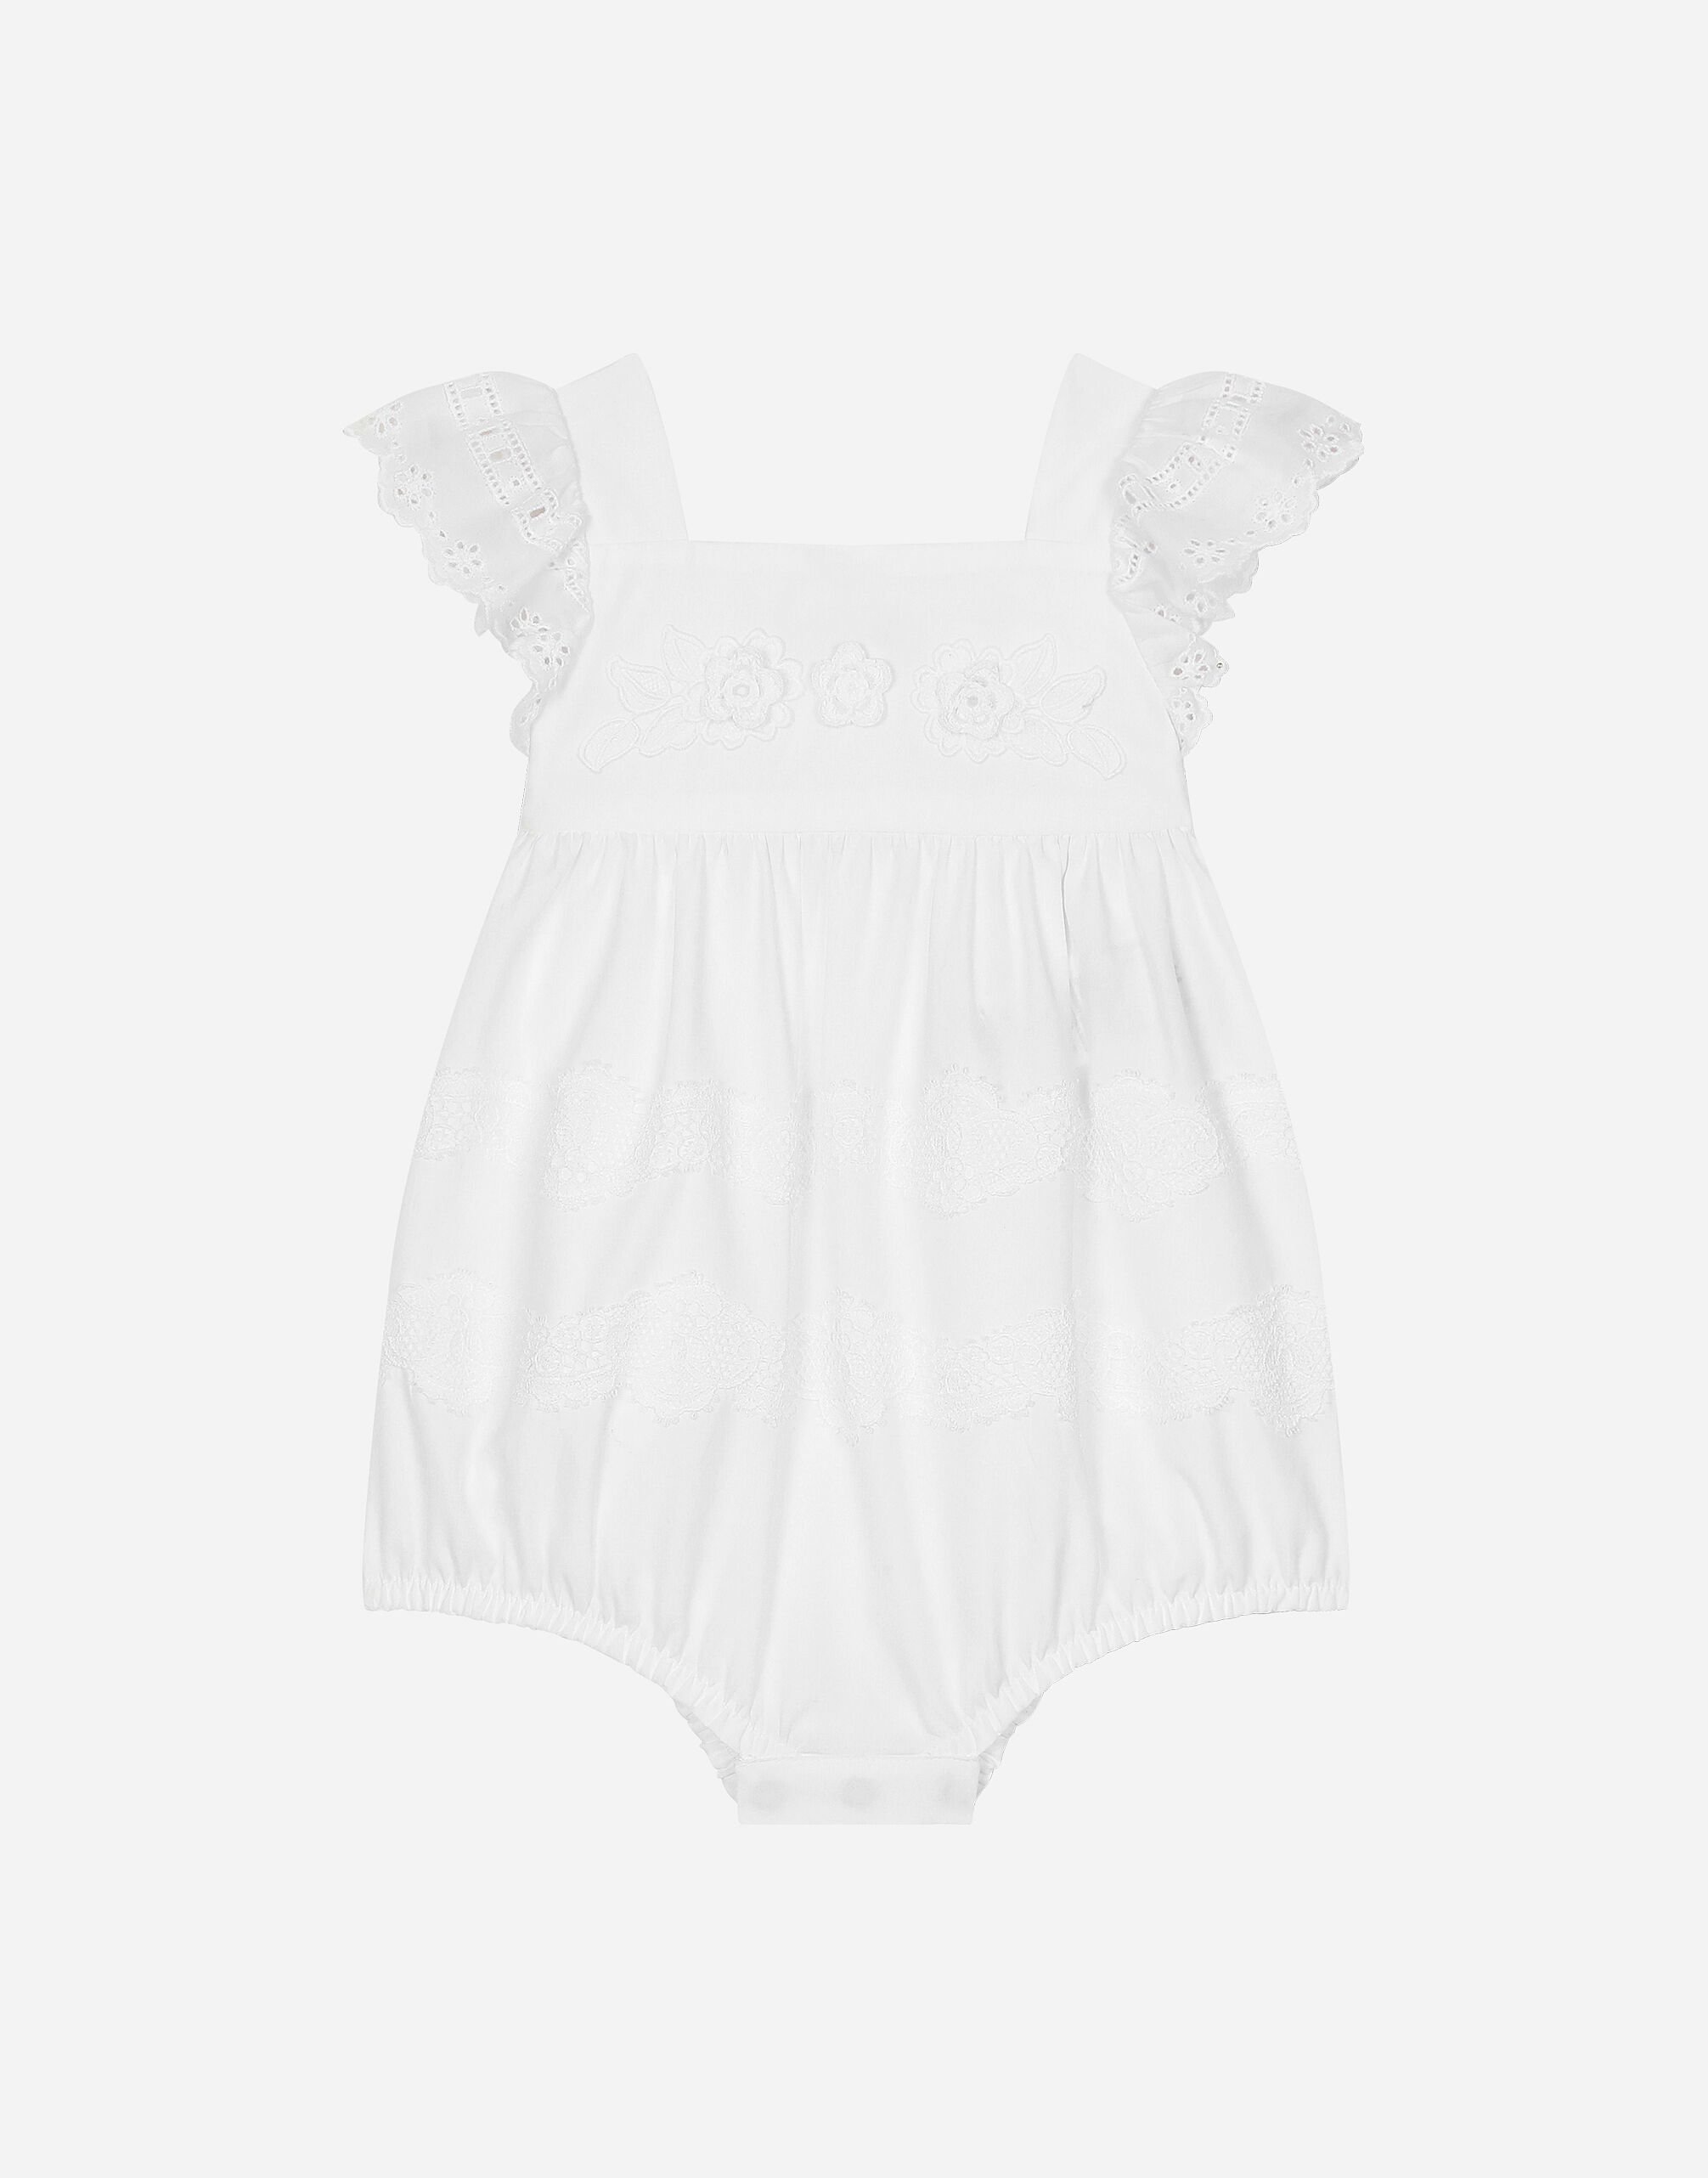 ${brand} PLAYSUIT IN COTTON WITH LACE DETAILING ${colorDescription} ${masterID}